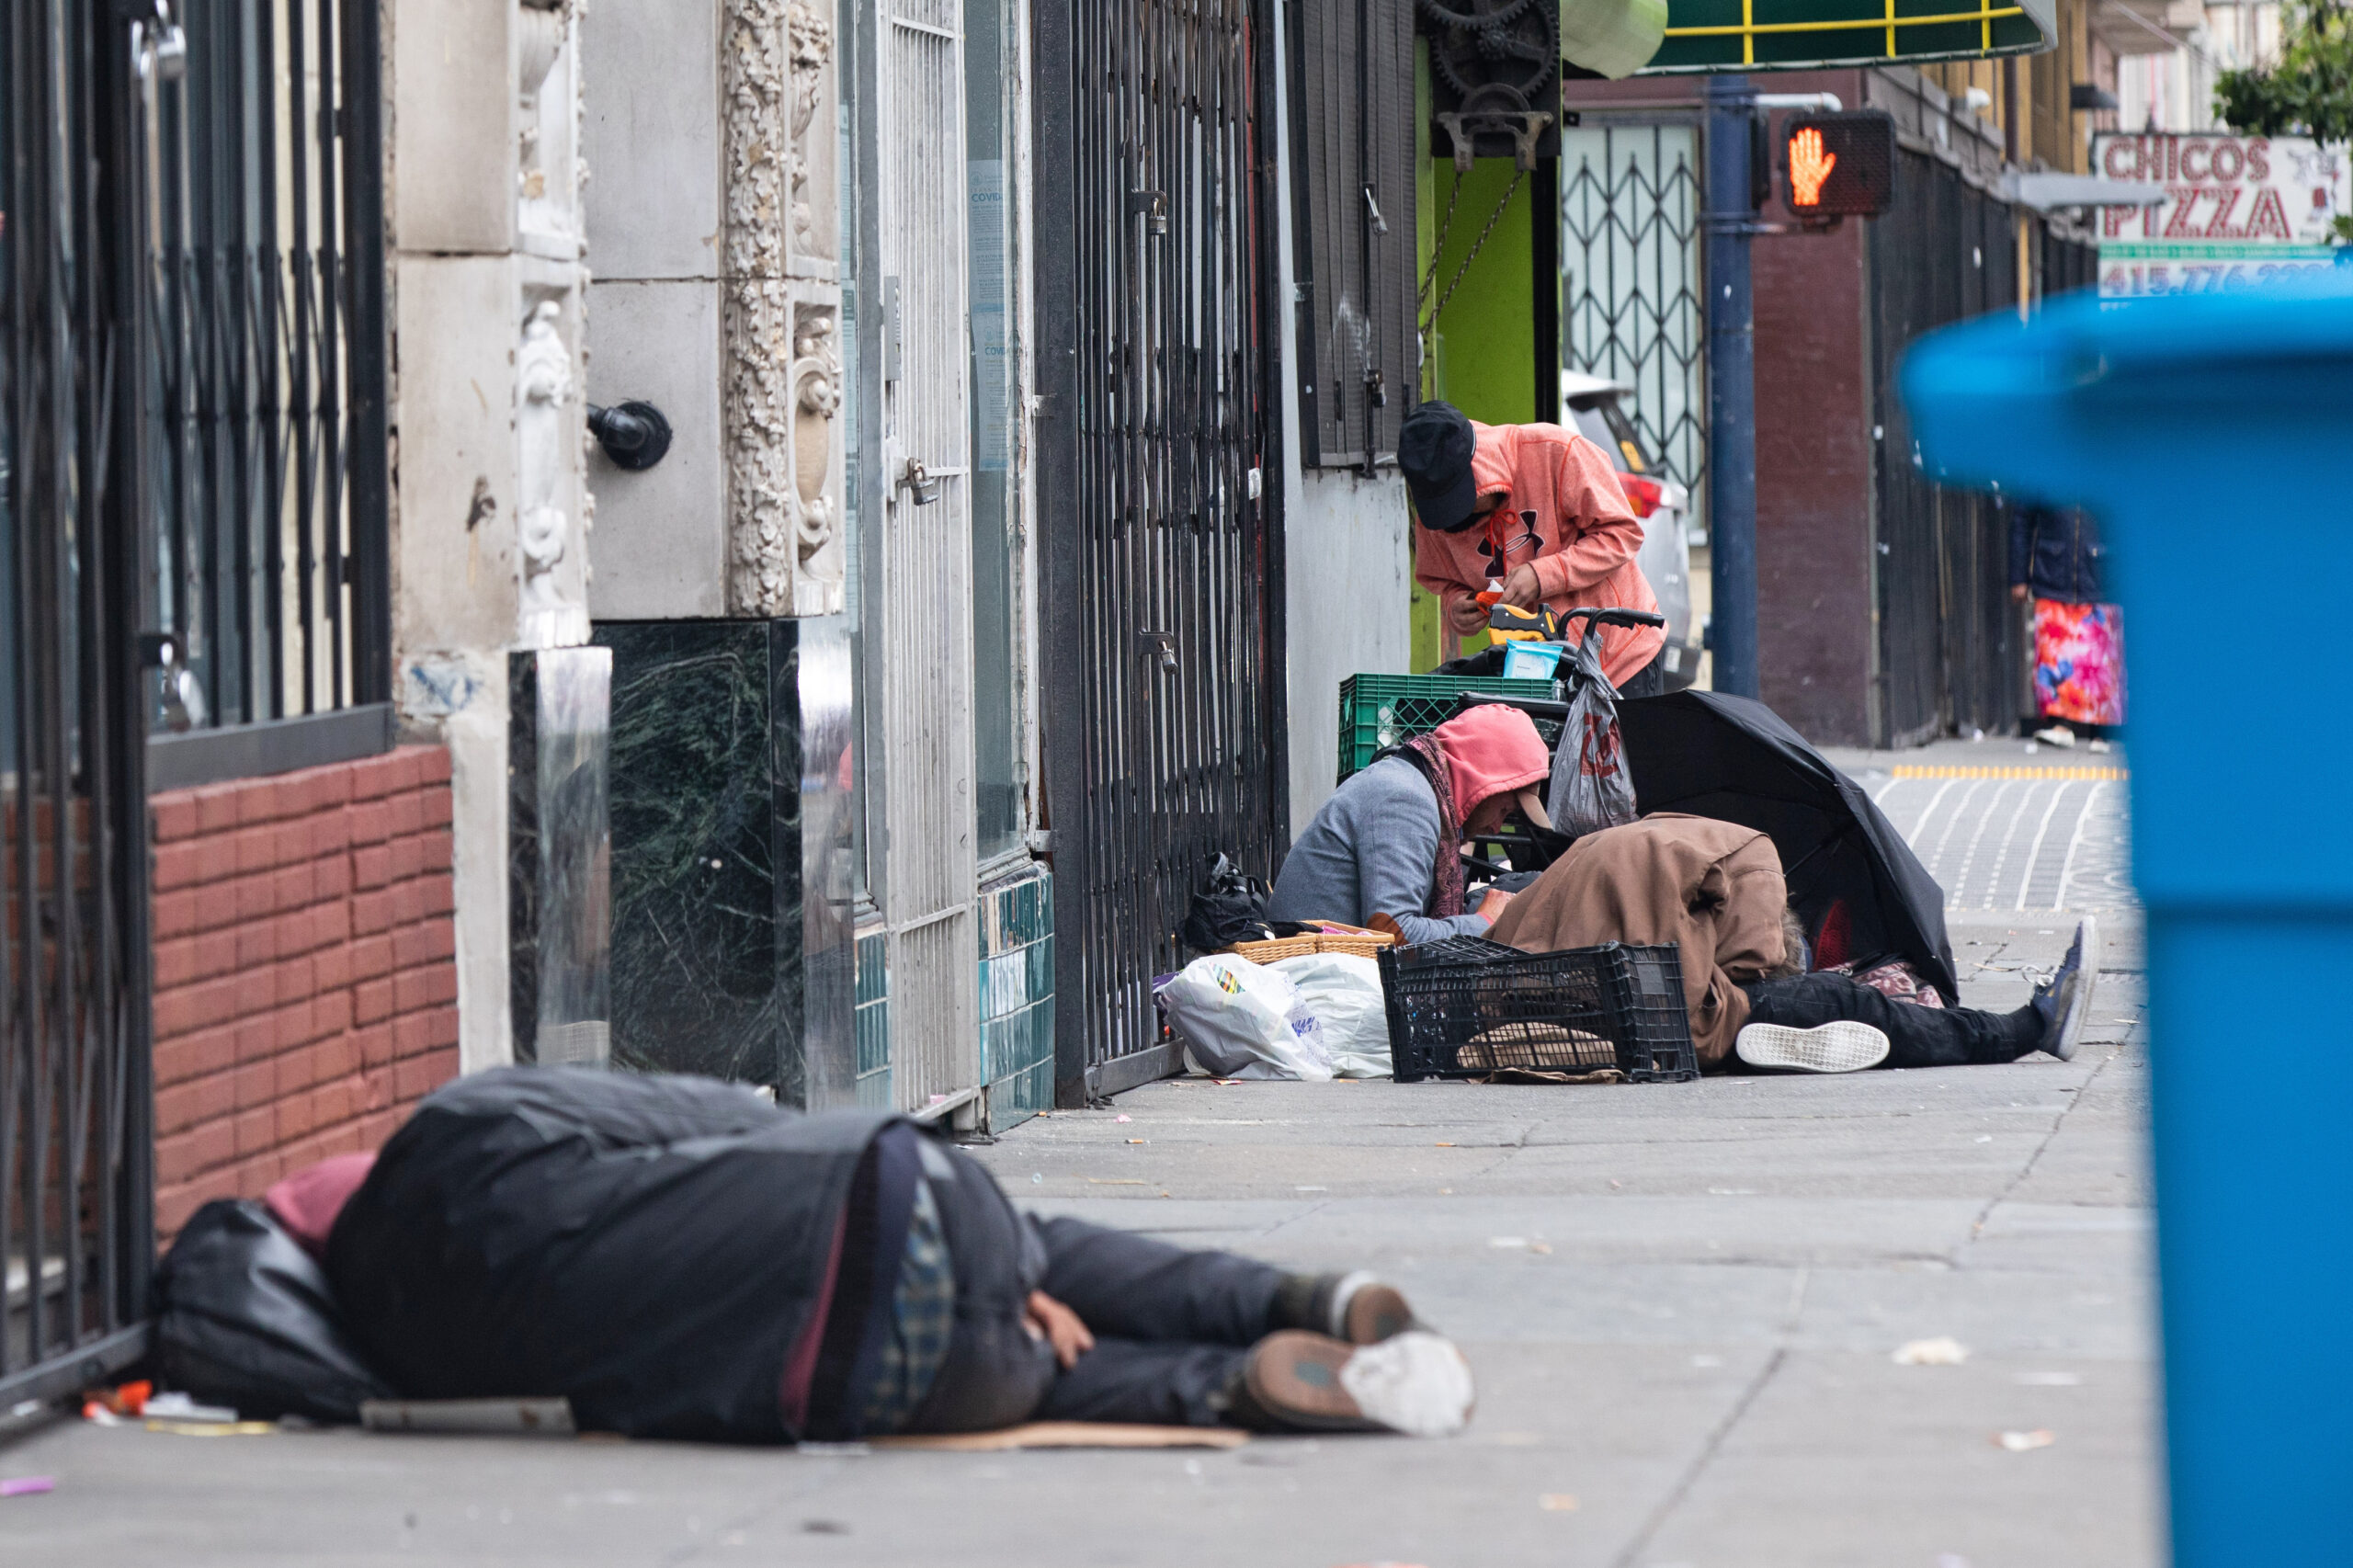 This California City Was Making a Difference on Homelessness. Then the Money Ran Out